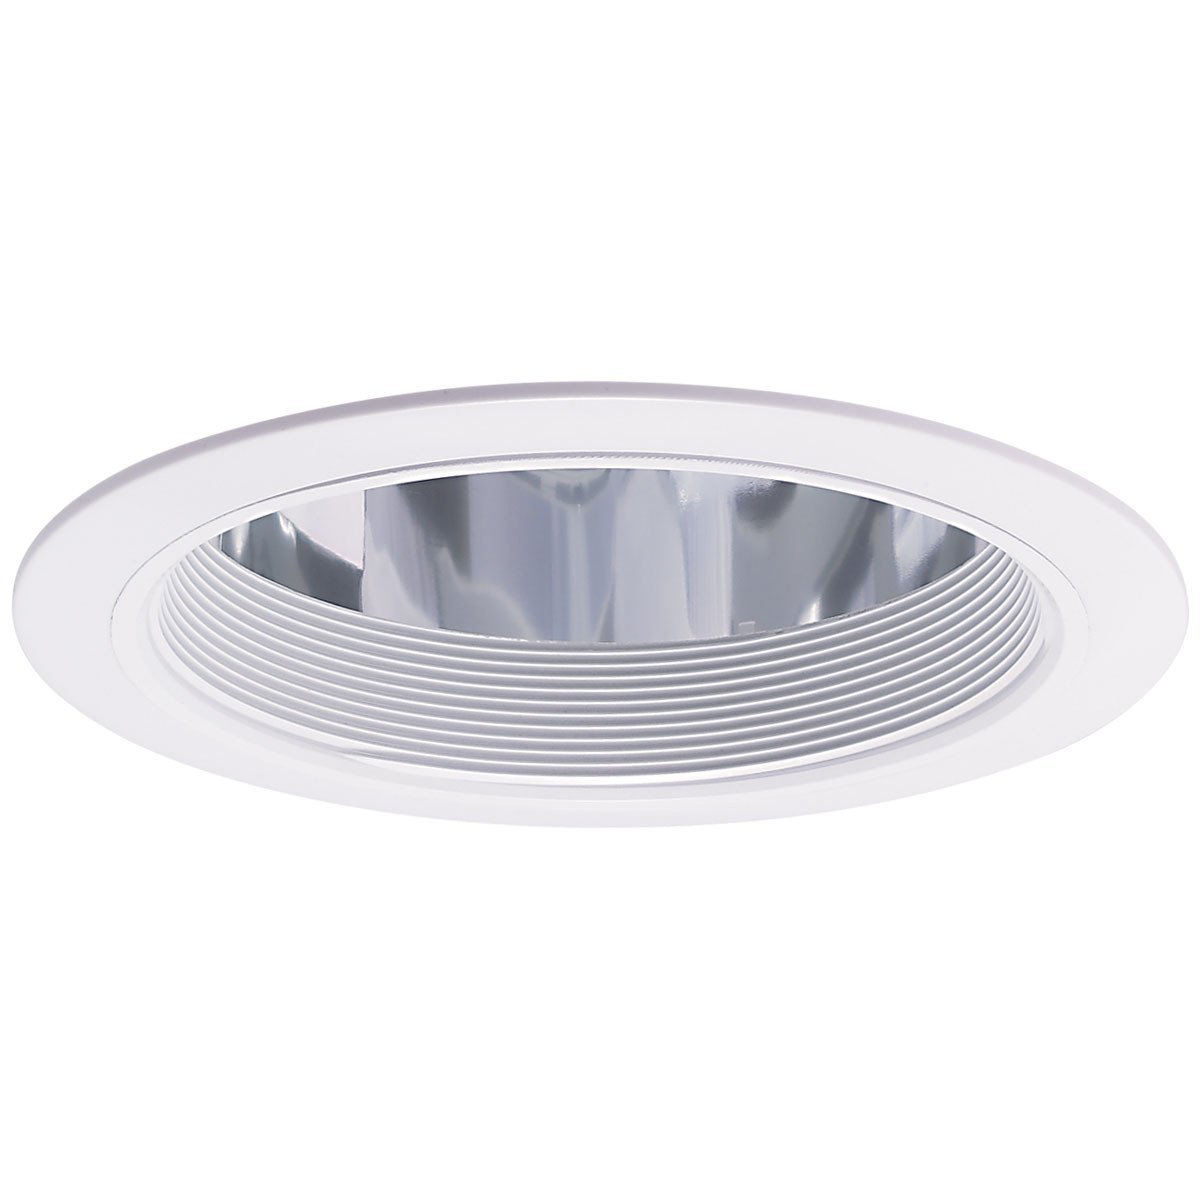 Spec Clear Reflector, White Metal Baffle Insert, White Plastic Ring Recessed Nora Lighting 